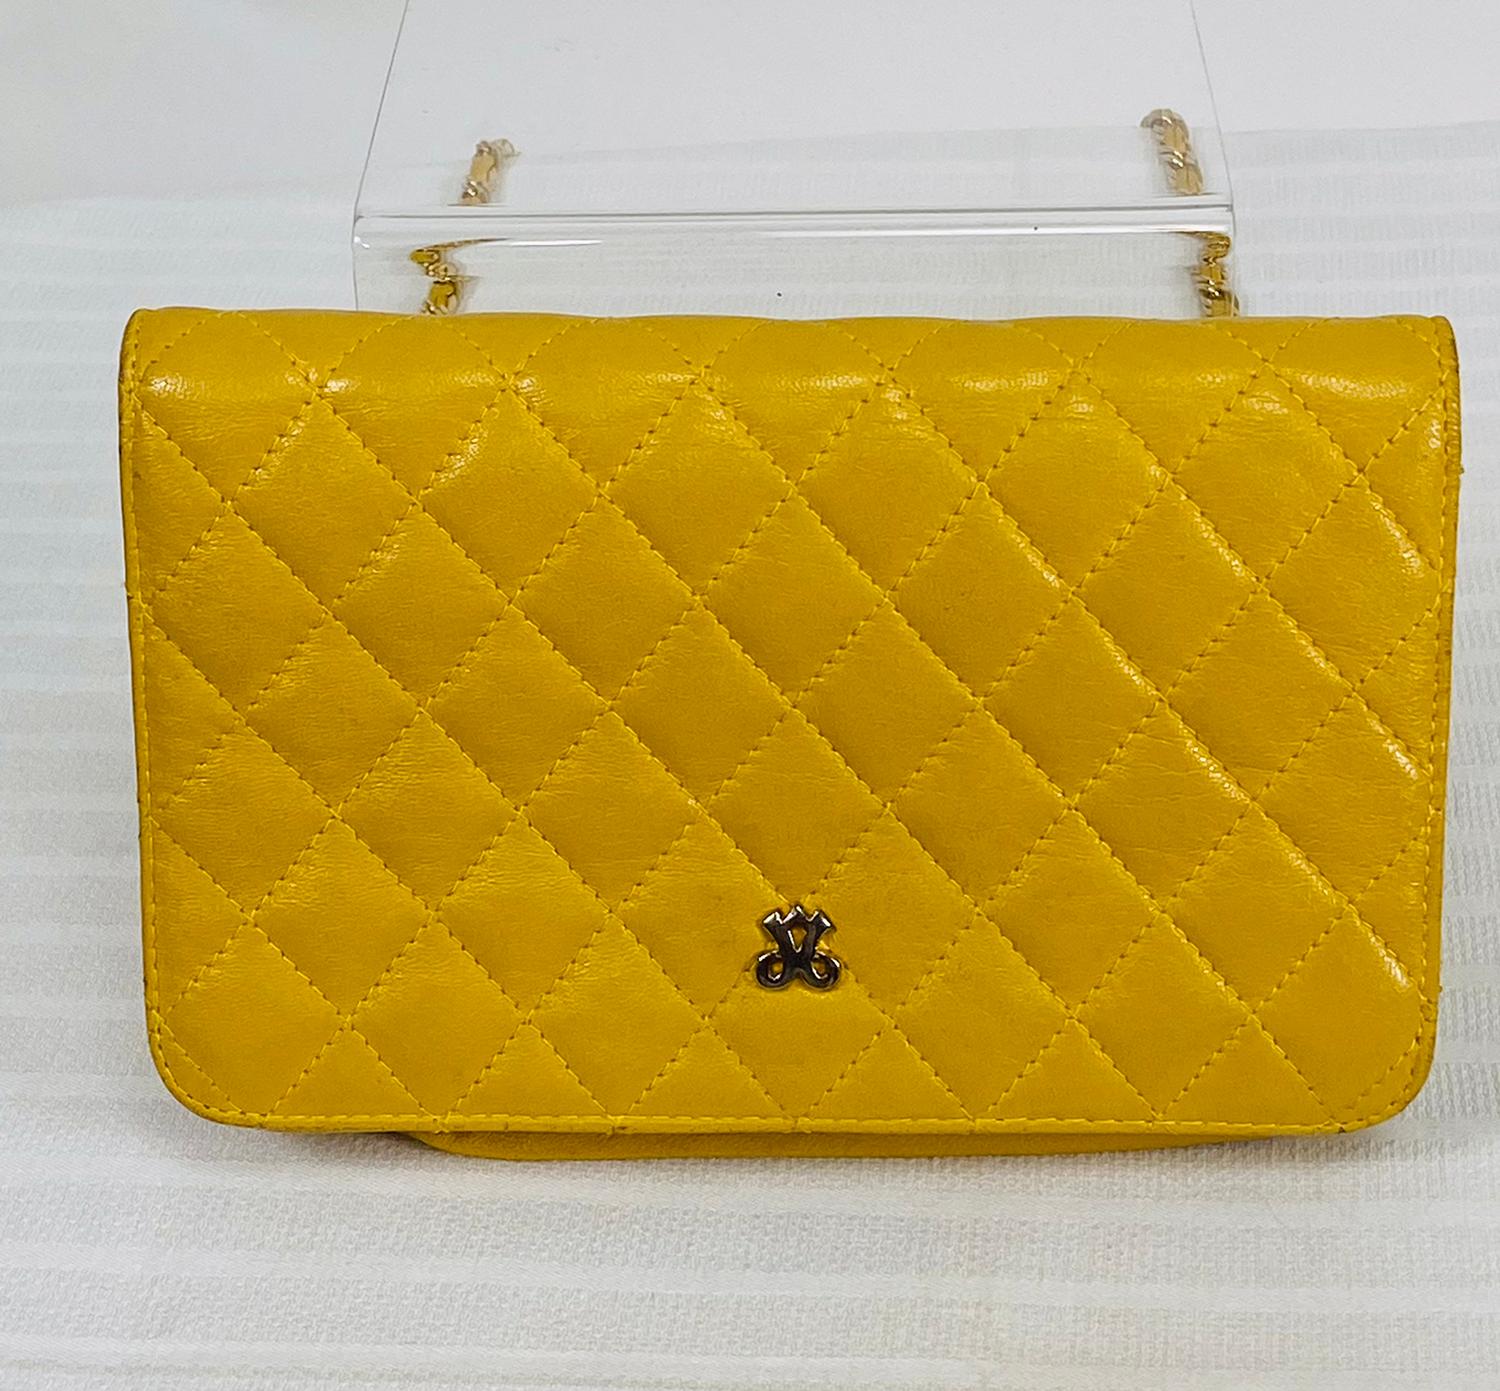 Vintage Jay Herbert mustard yellow quilted soft leather, mini flap front, chain strap shoulder bag. Cute bag in an unusual and bright colour. Long gold chain woven with yellow leather can be carried cross body. Lined in leather and taupe grosgrain